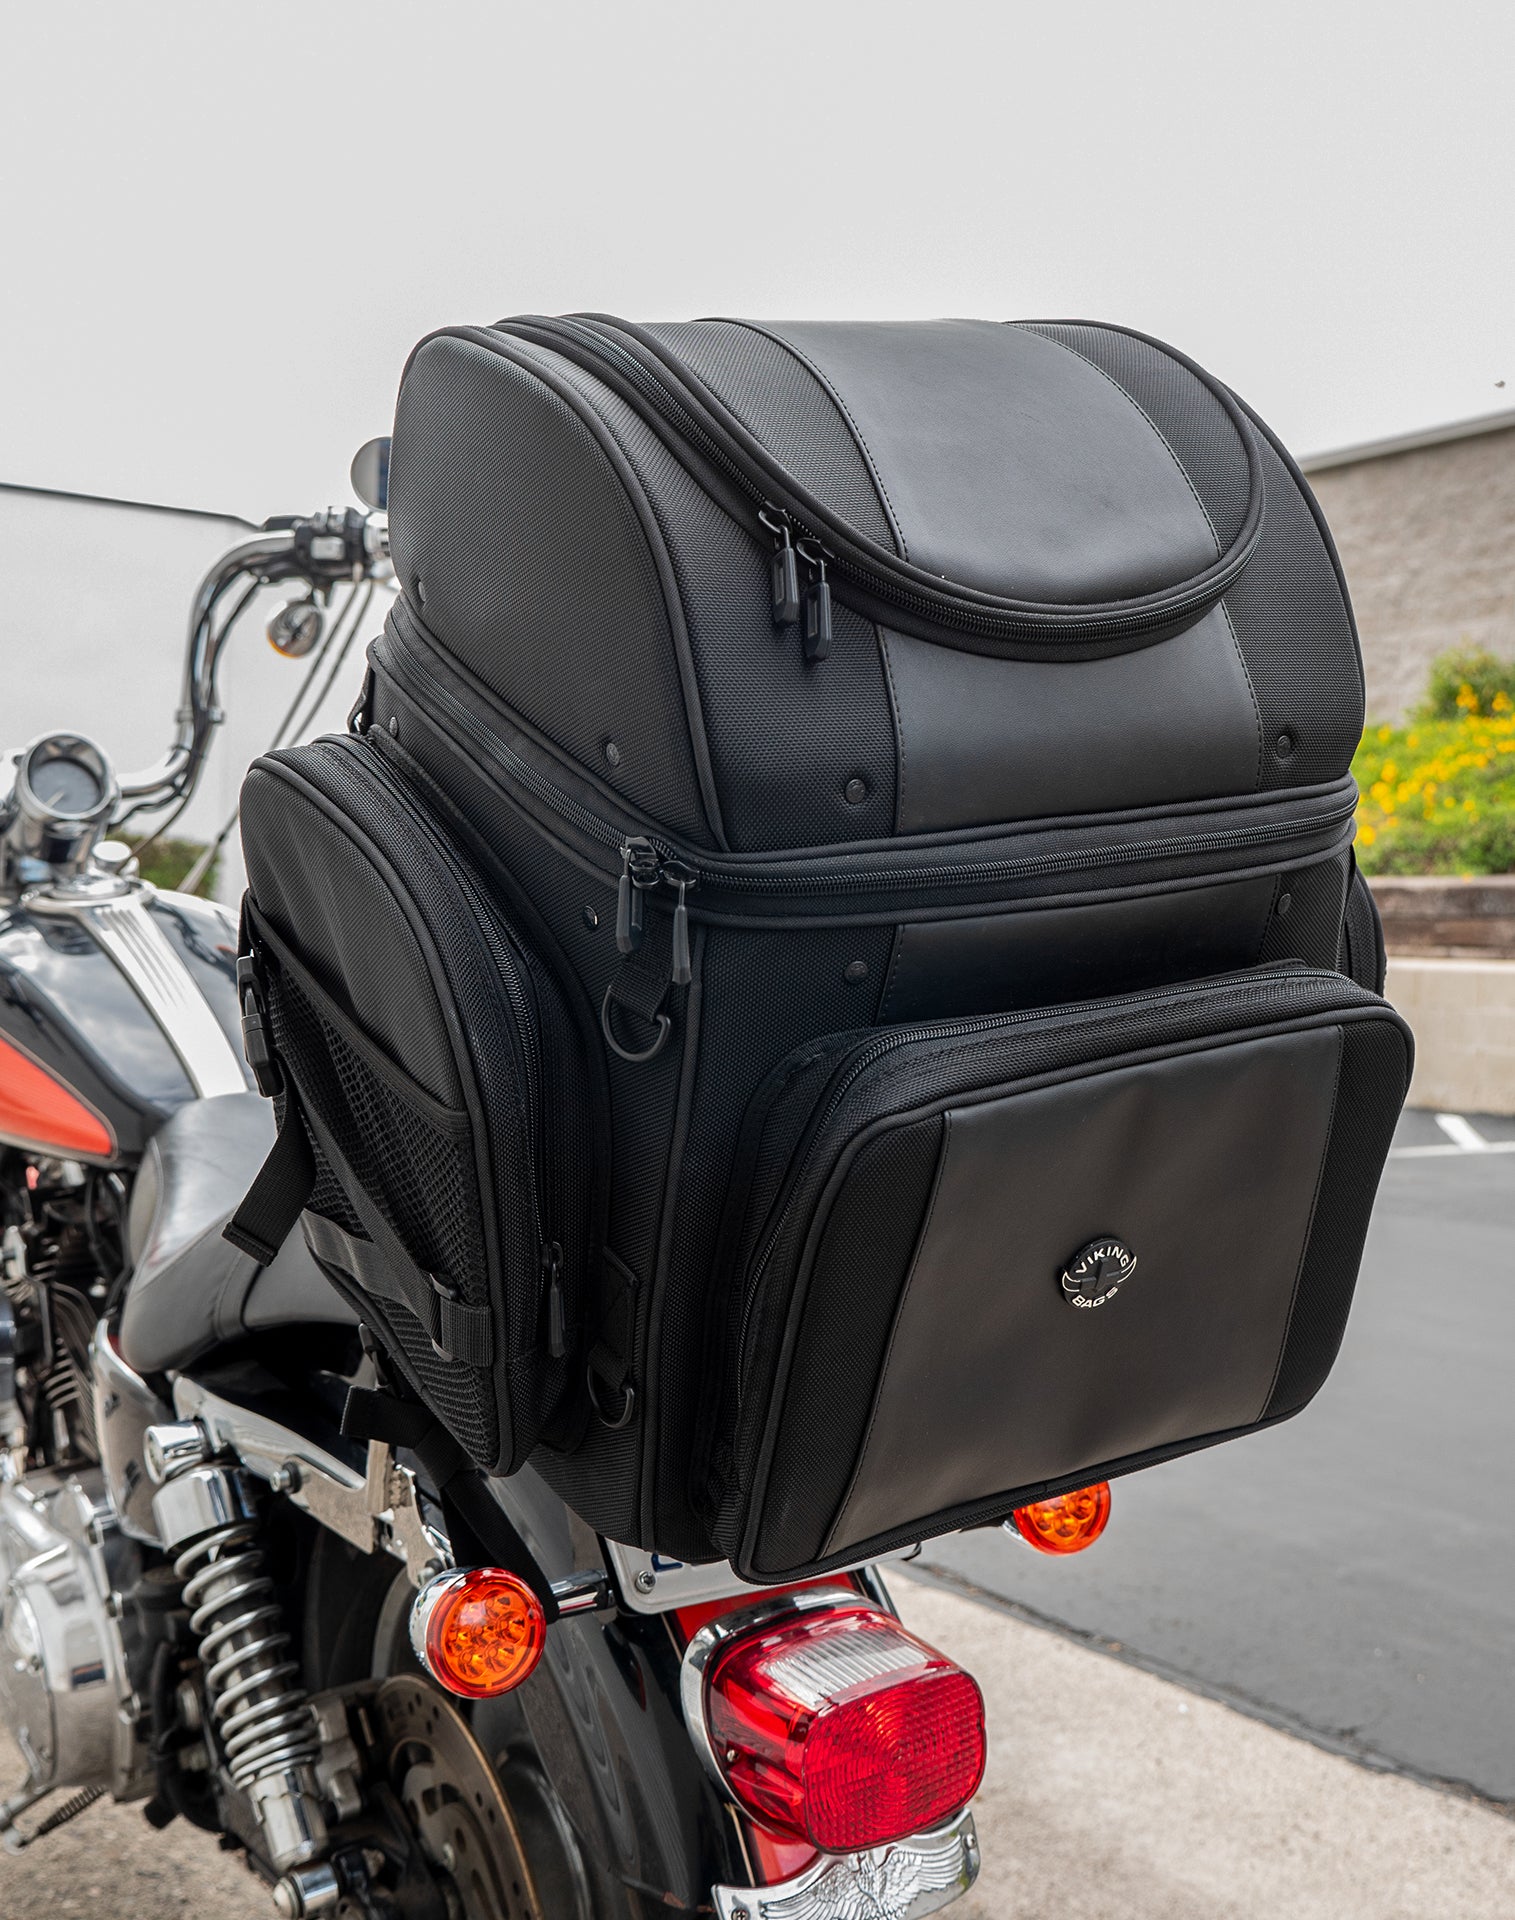 52L - Galleon XL Indian Motorcycle Tail Bag